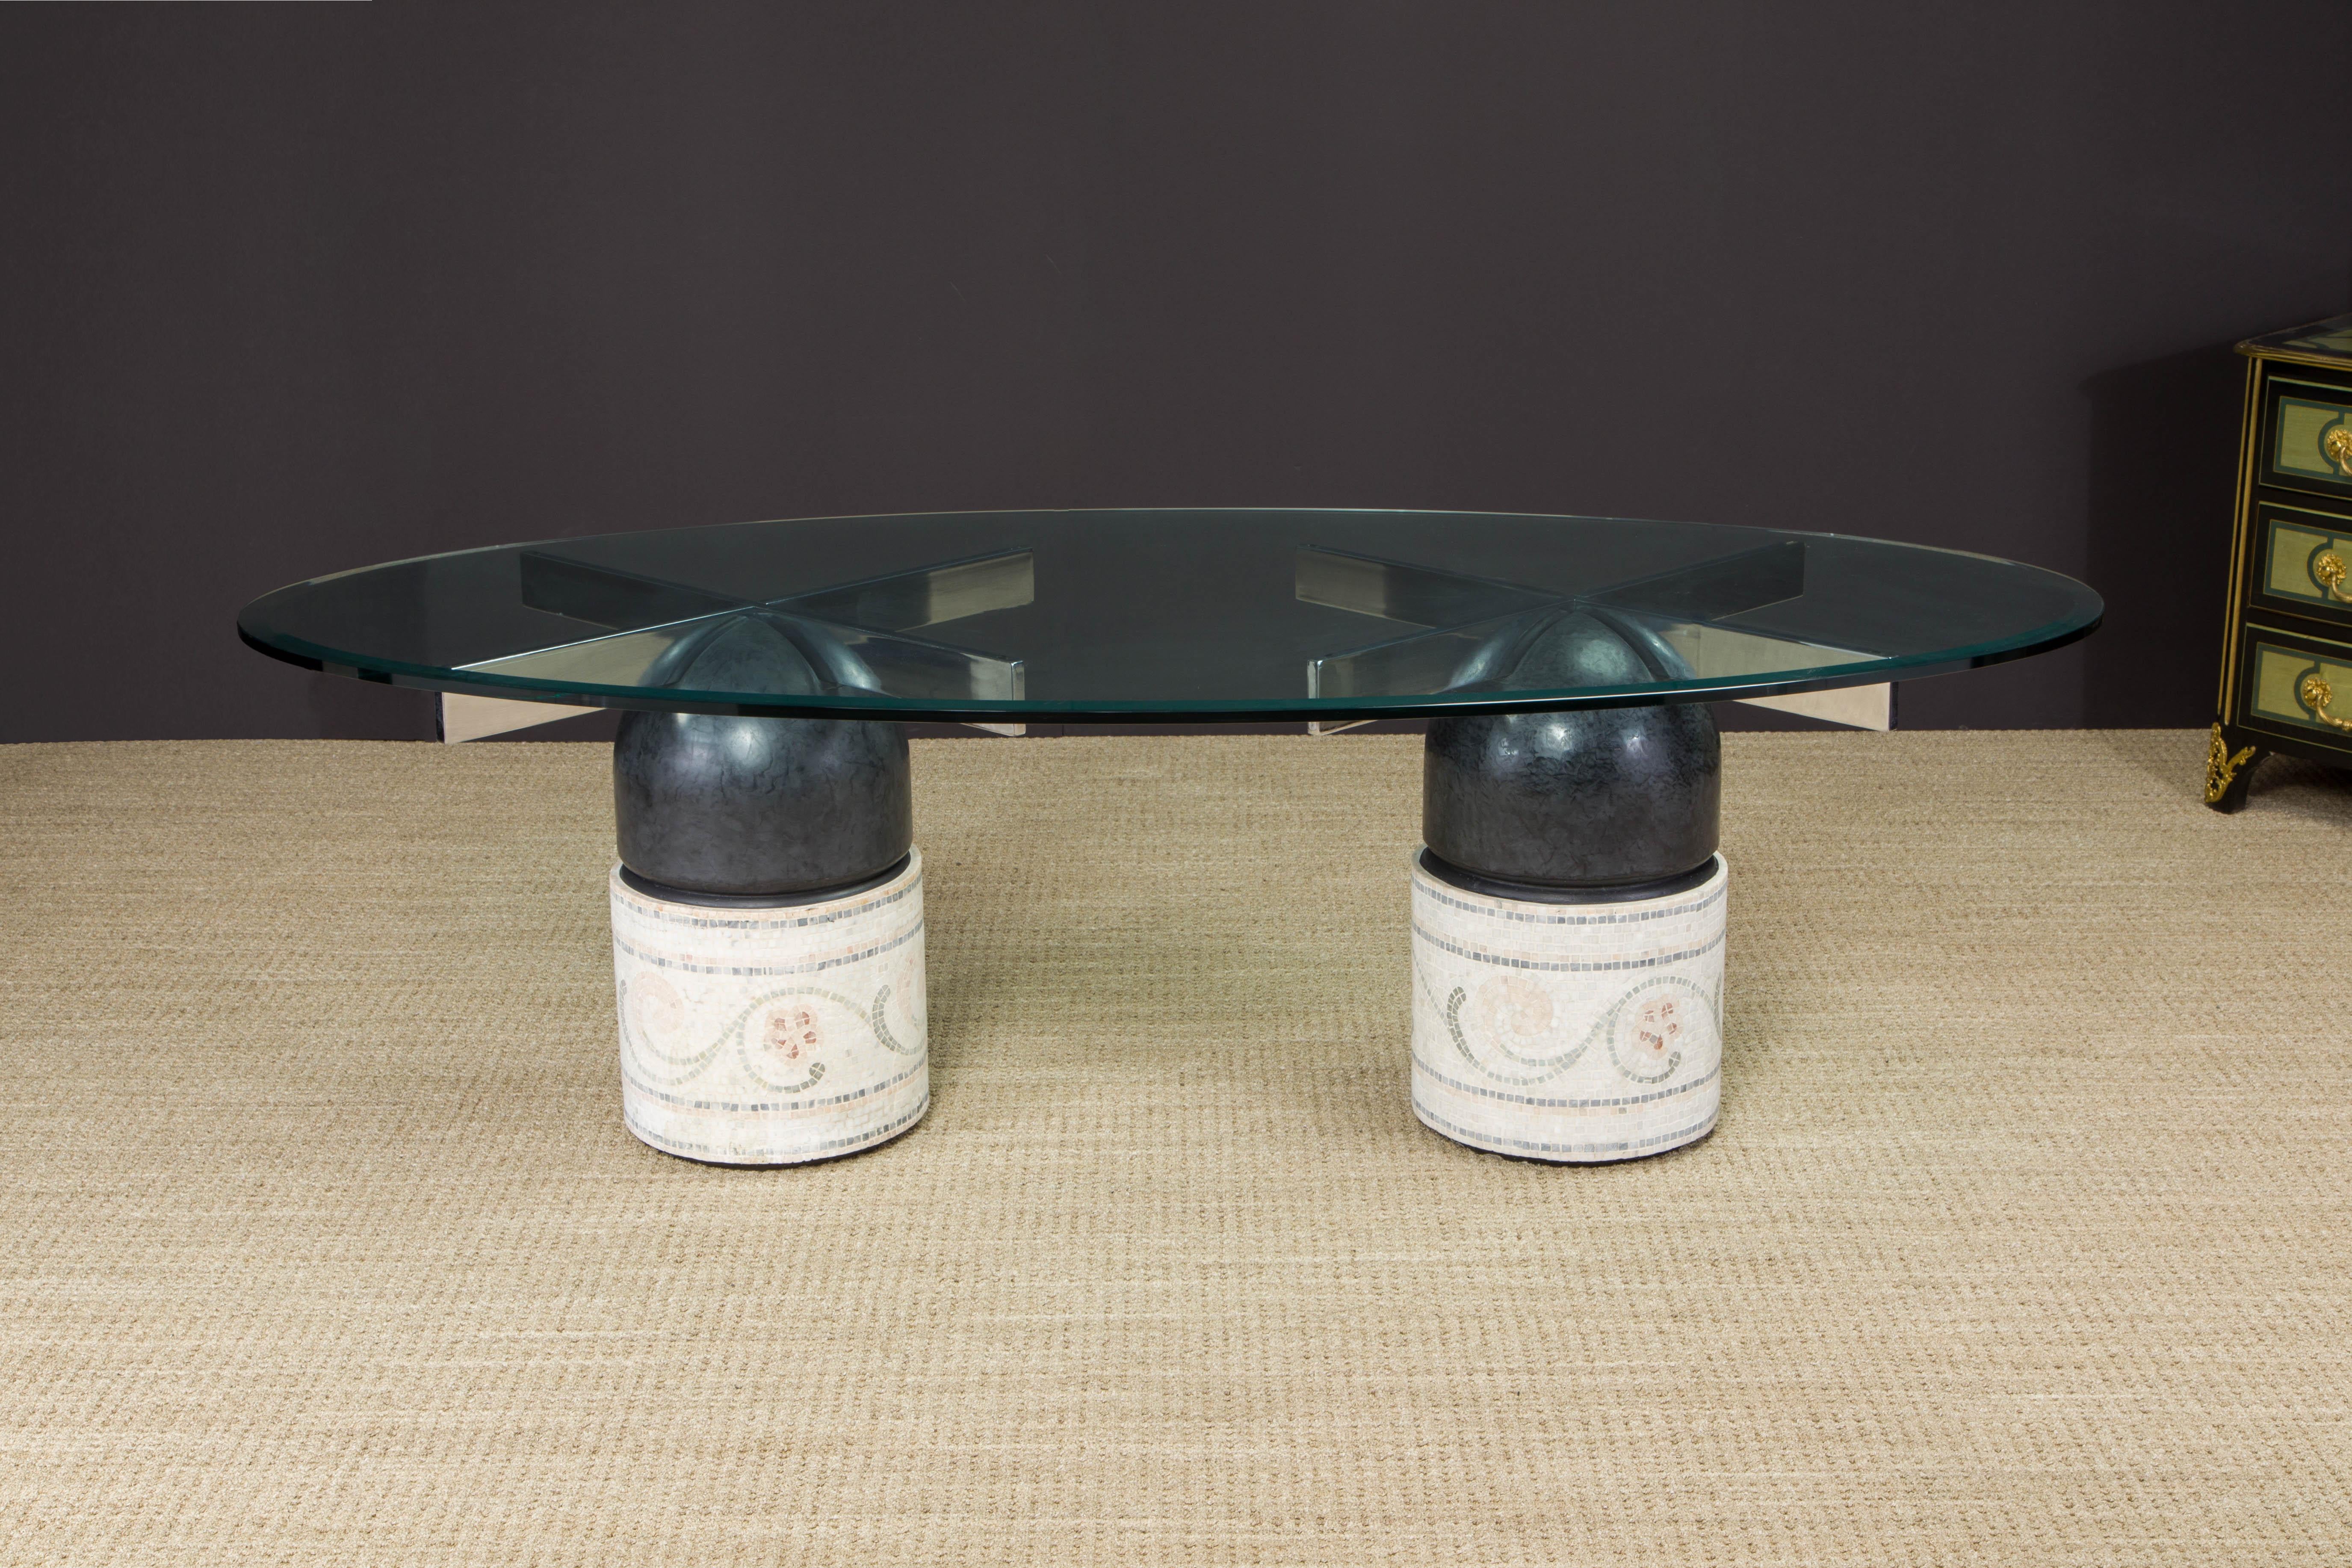 Modern Customized 'Paracarro' Dining Table Bases by Giovanni Offredi for Saporiti 1970s For Sale